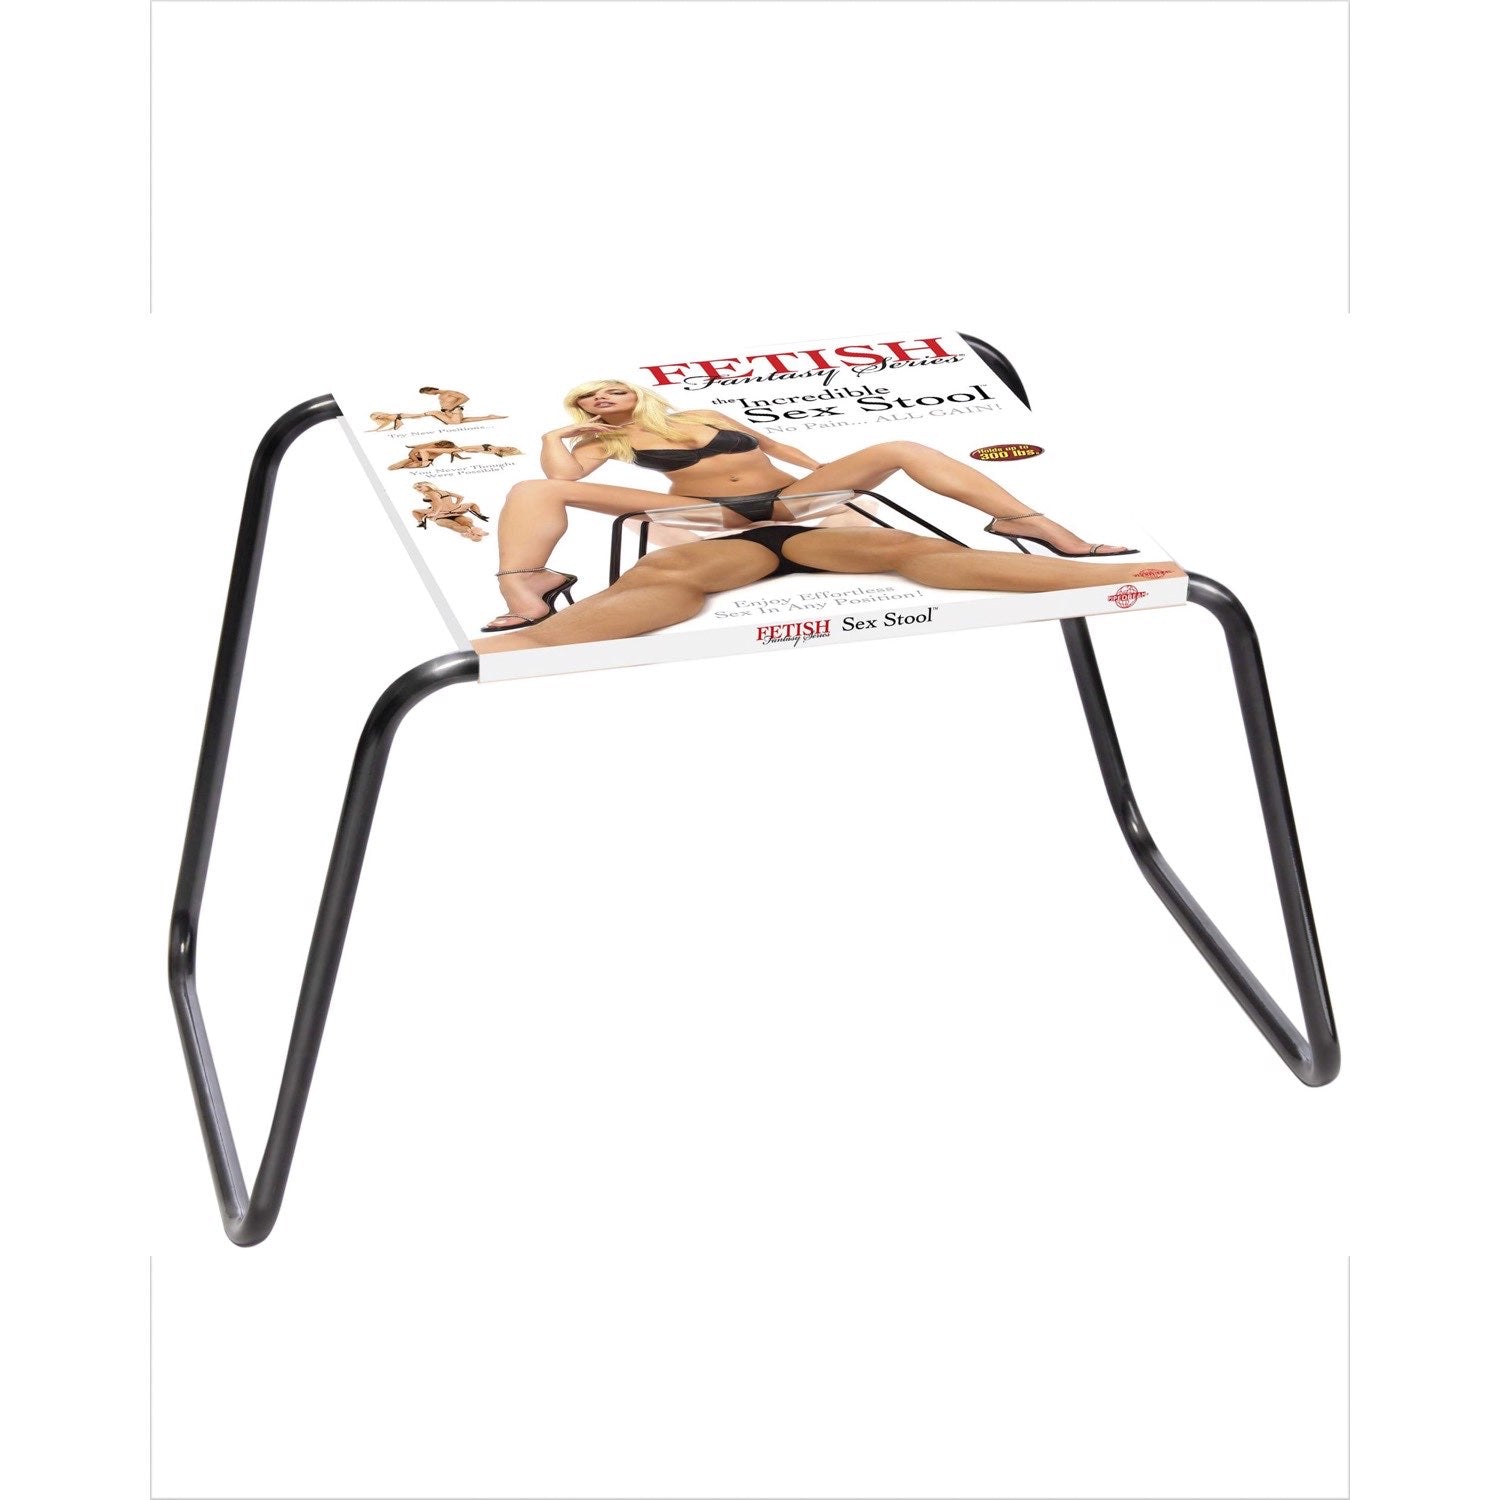 Fetish Fantasy Series The Incredible Sex Stool - Positional Aid by Pipedream